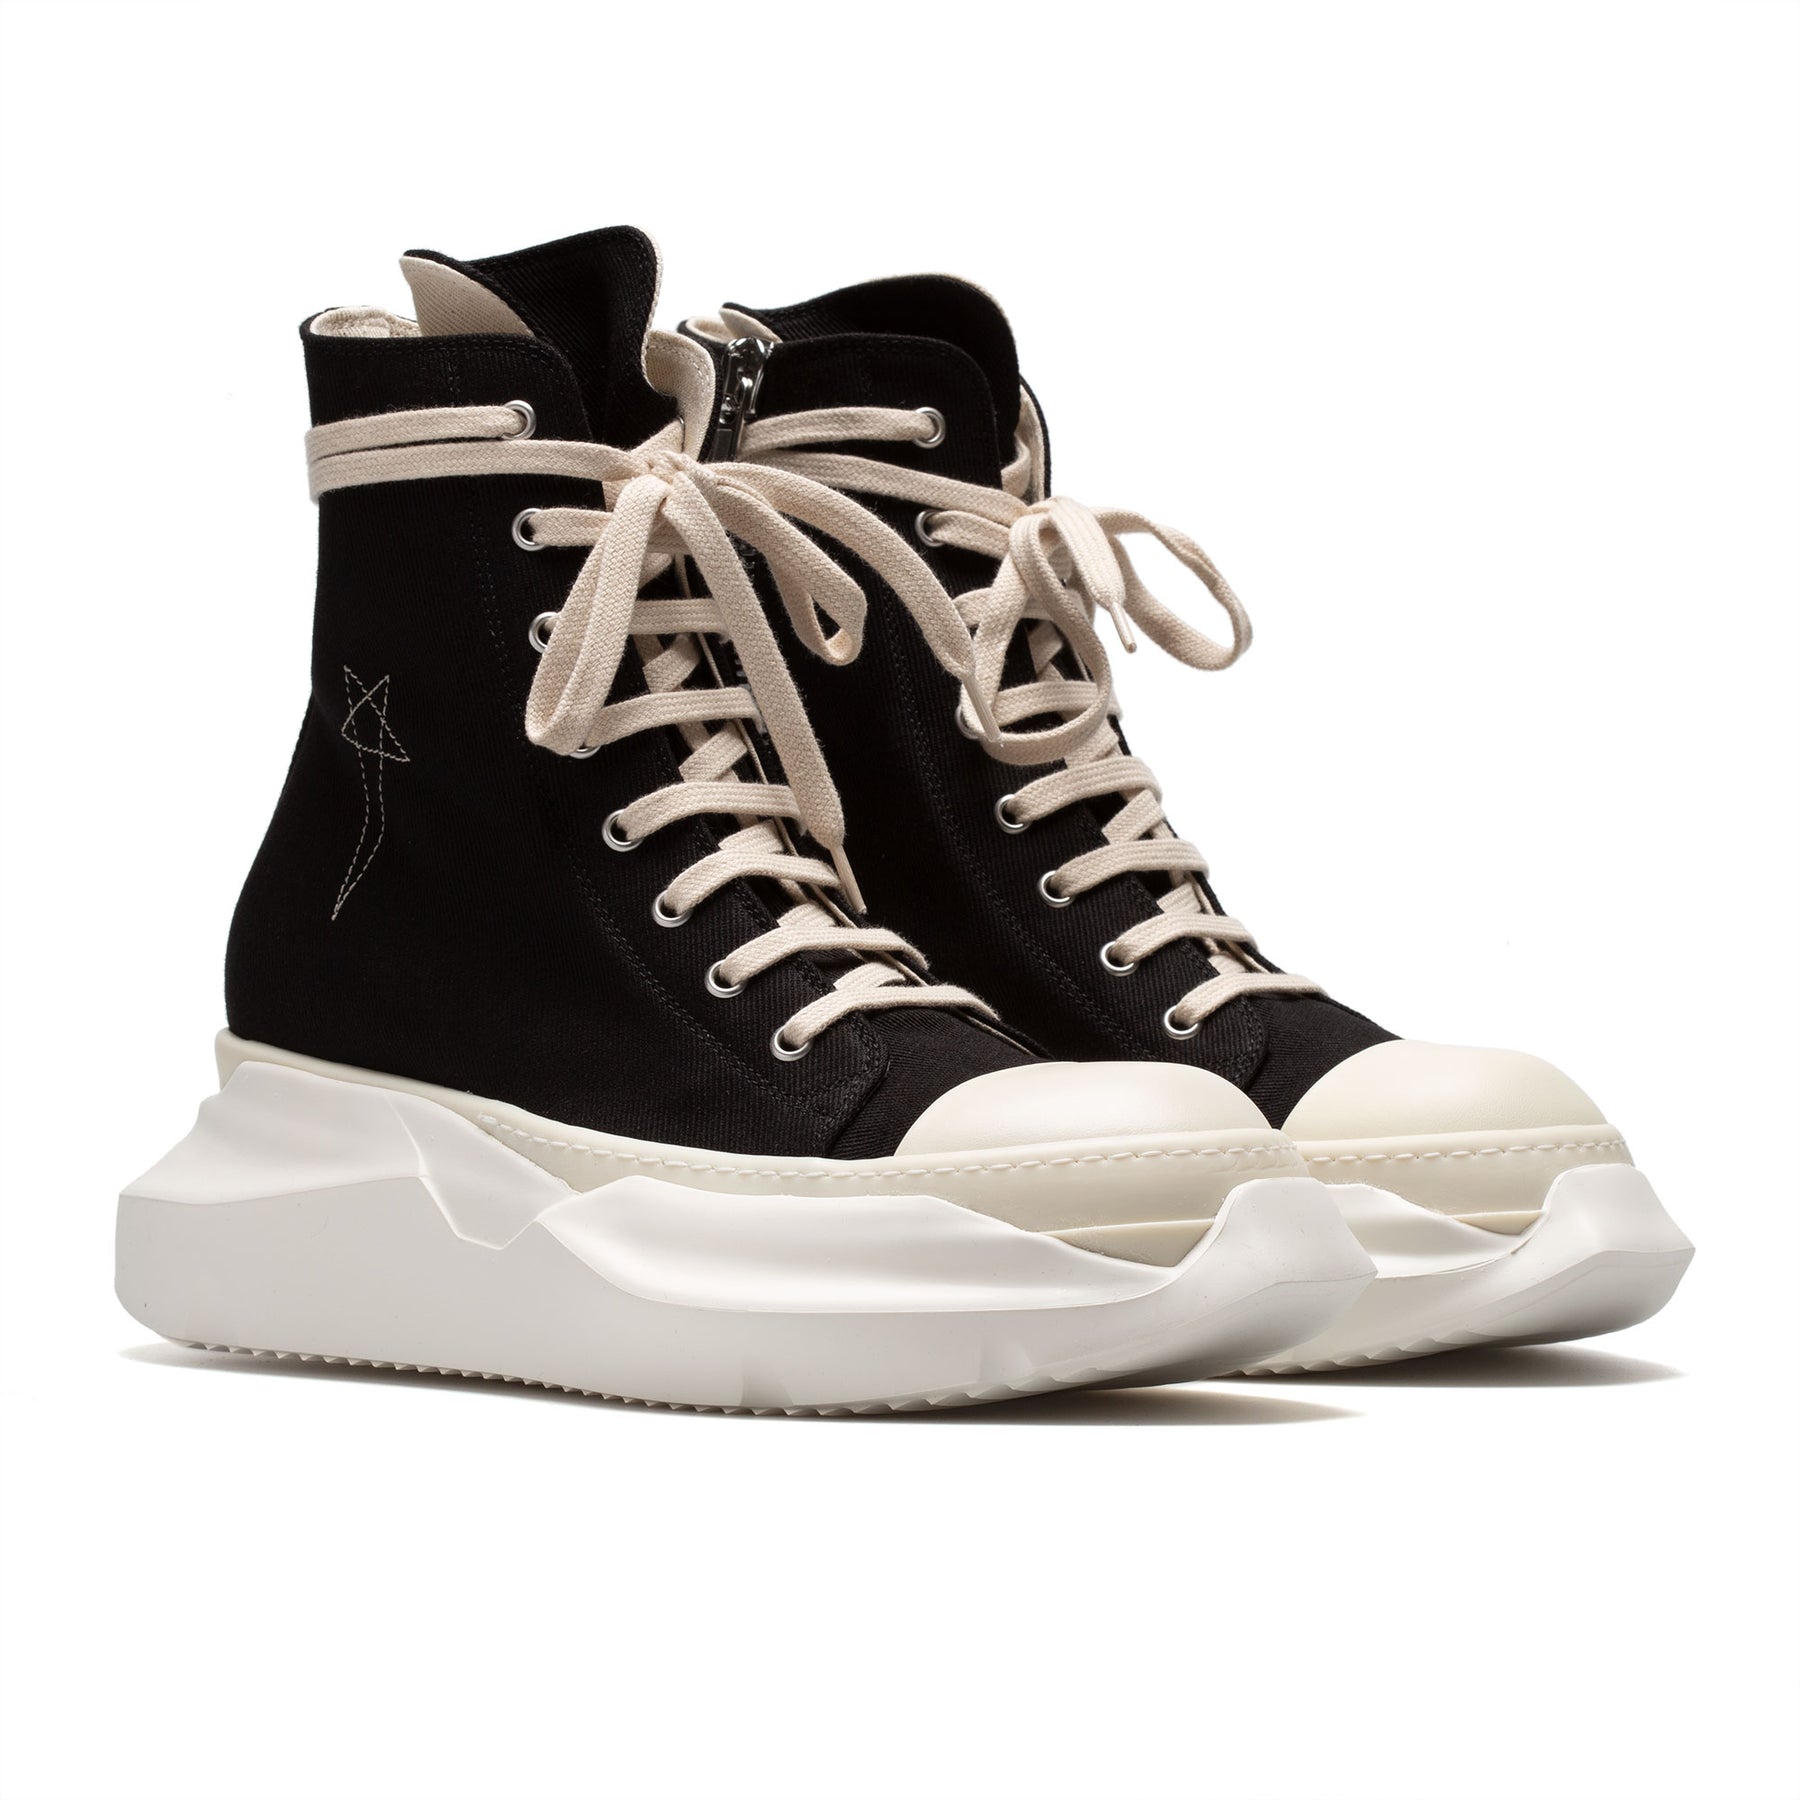 Rick Owens DRKSHDW ABSTRACT 43 | nate-hospital.com